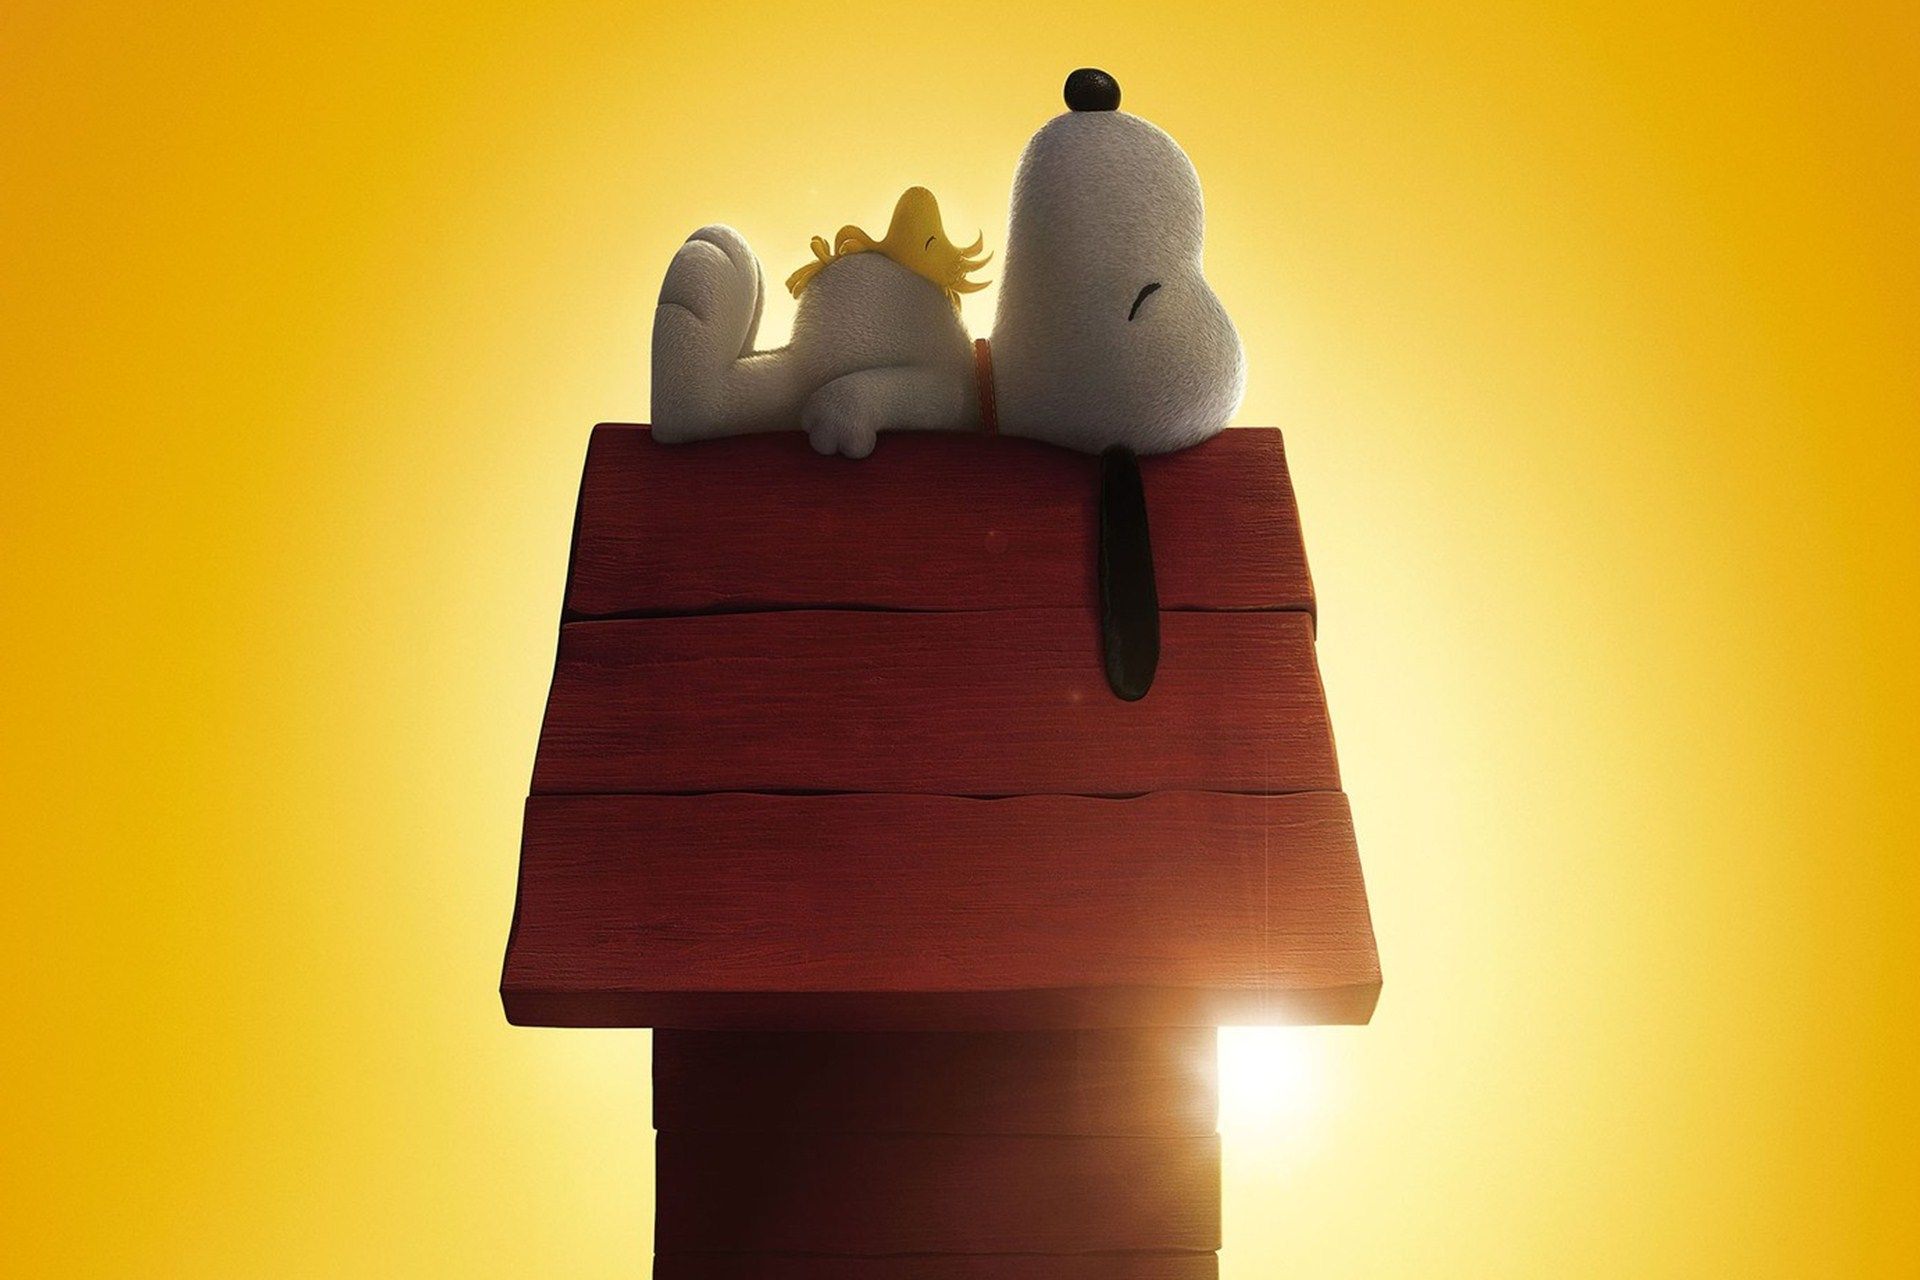 Peanut Snoopy 2015 HD Wallpaper, Peanut Snoopy Images, New Backgrounds